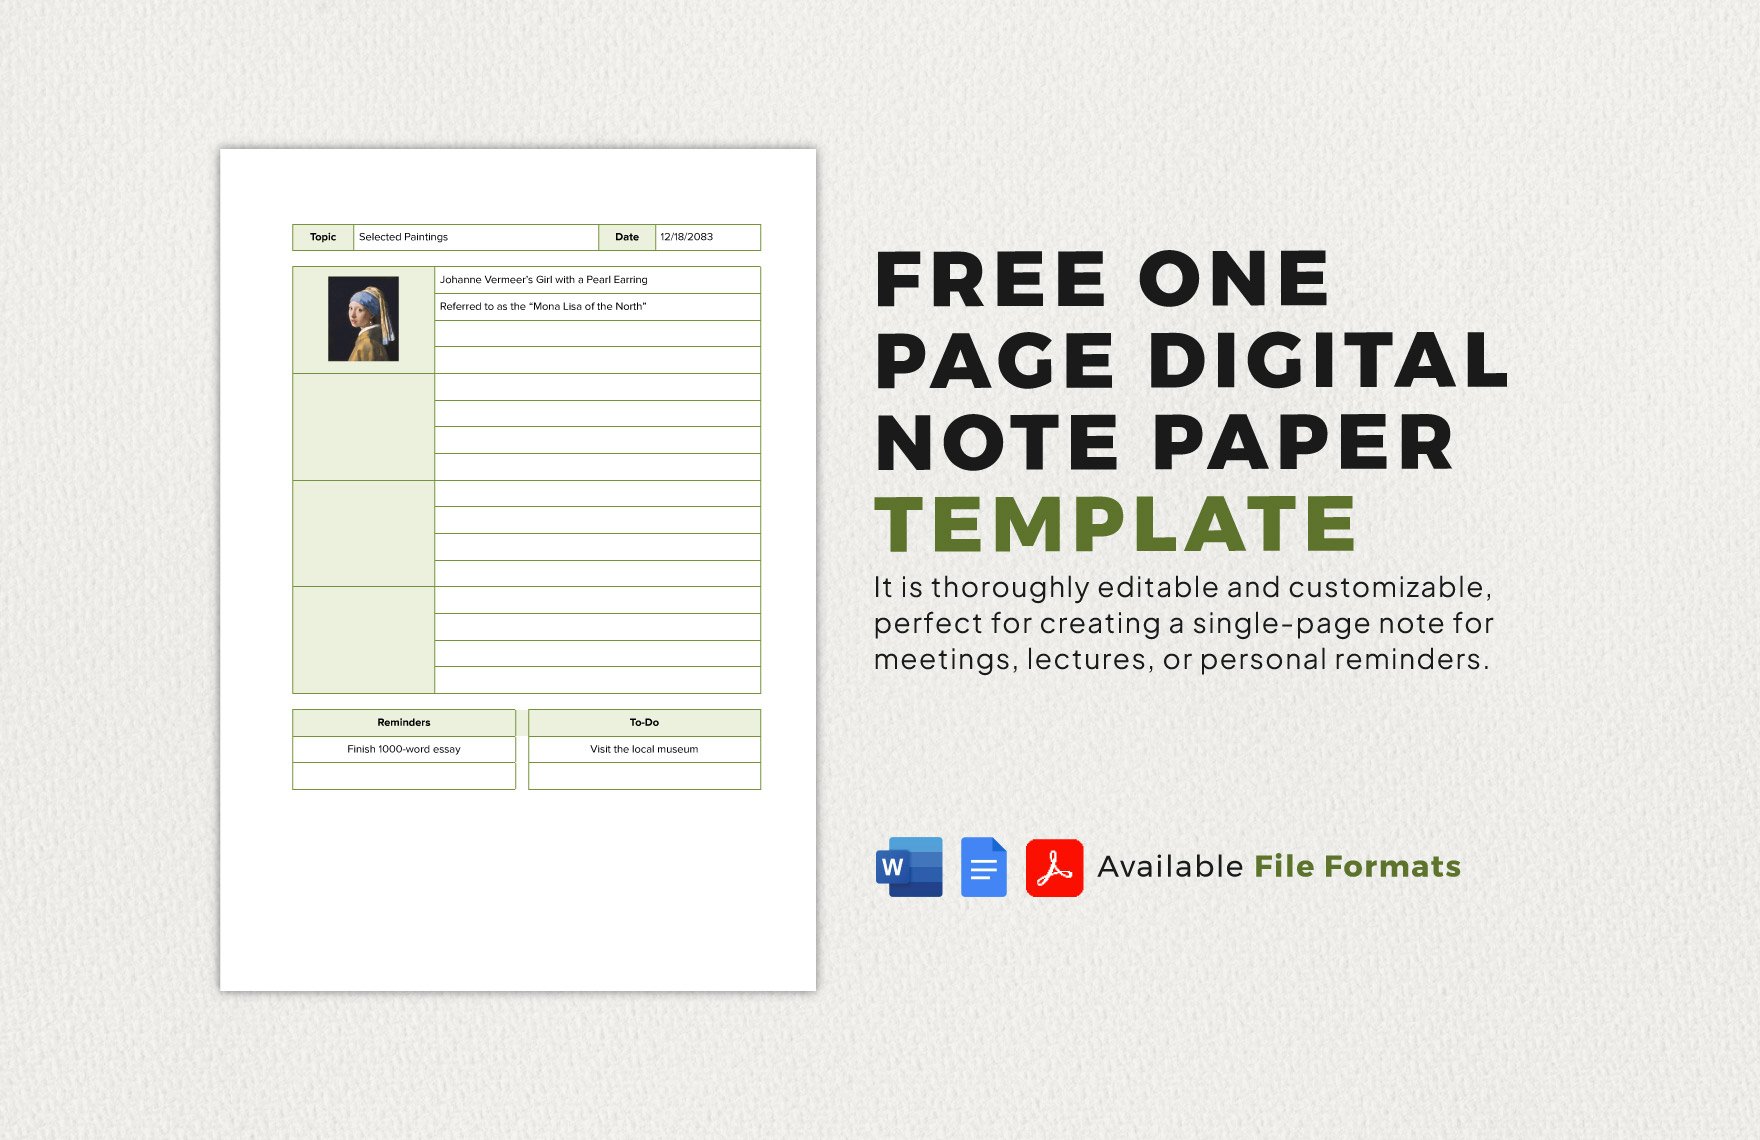 One Page Digital Note Paper Template in Word, Google Docs, PDF